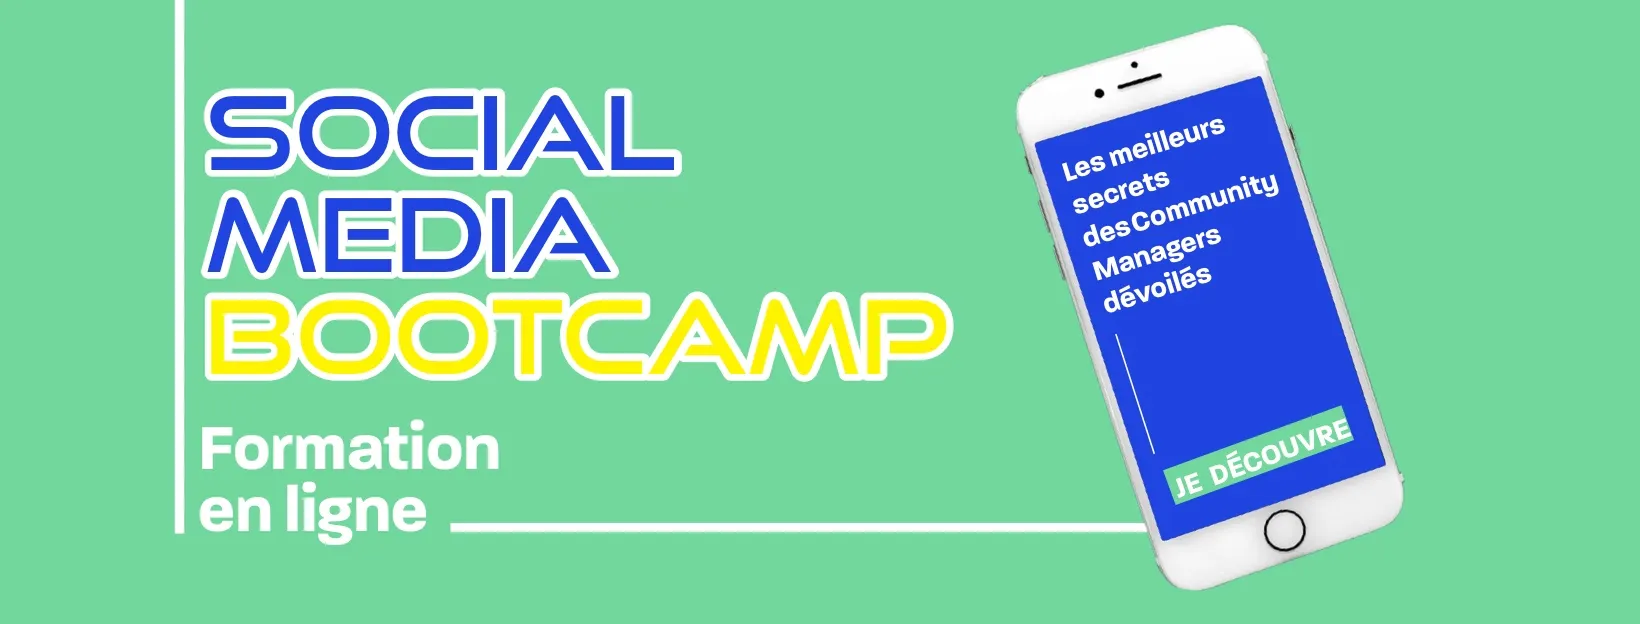 Green And Blue Social Media Bootcamp Facebook Banner Ad